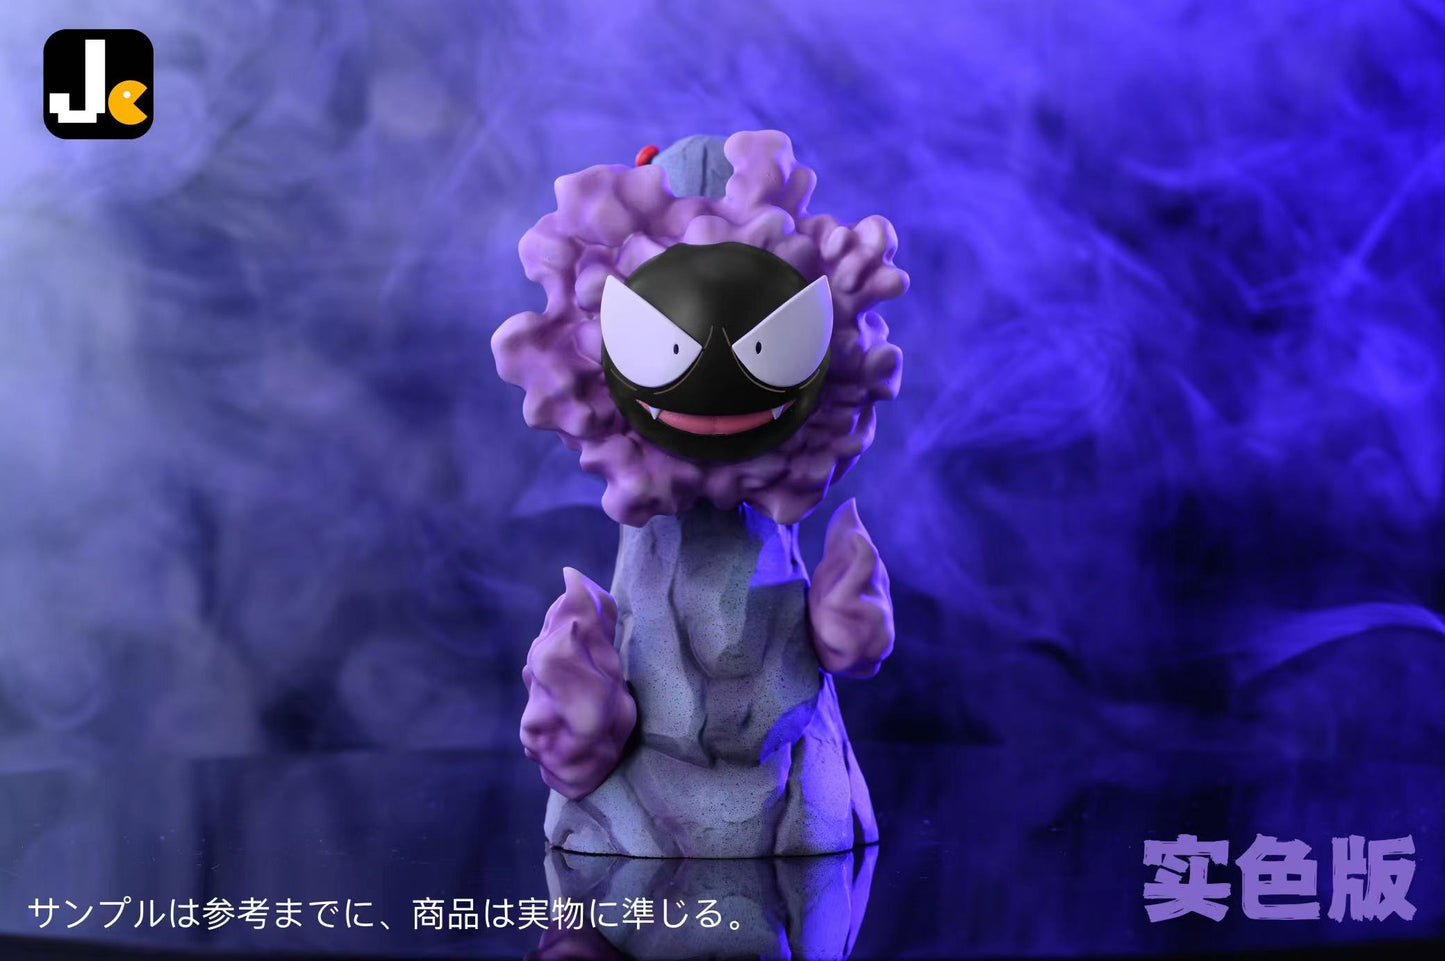 〖Sold Out〗Pokémon Peripheral Products Gastly #092   - JC Studio